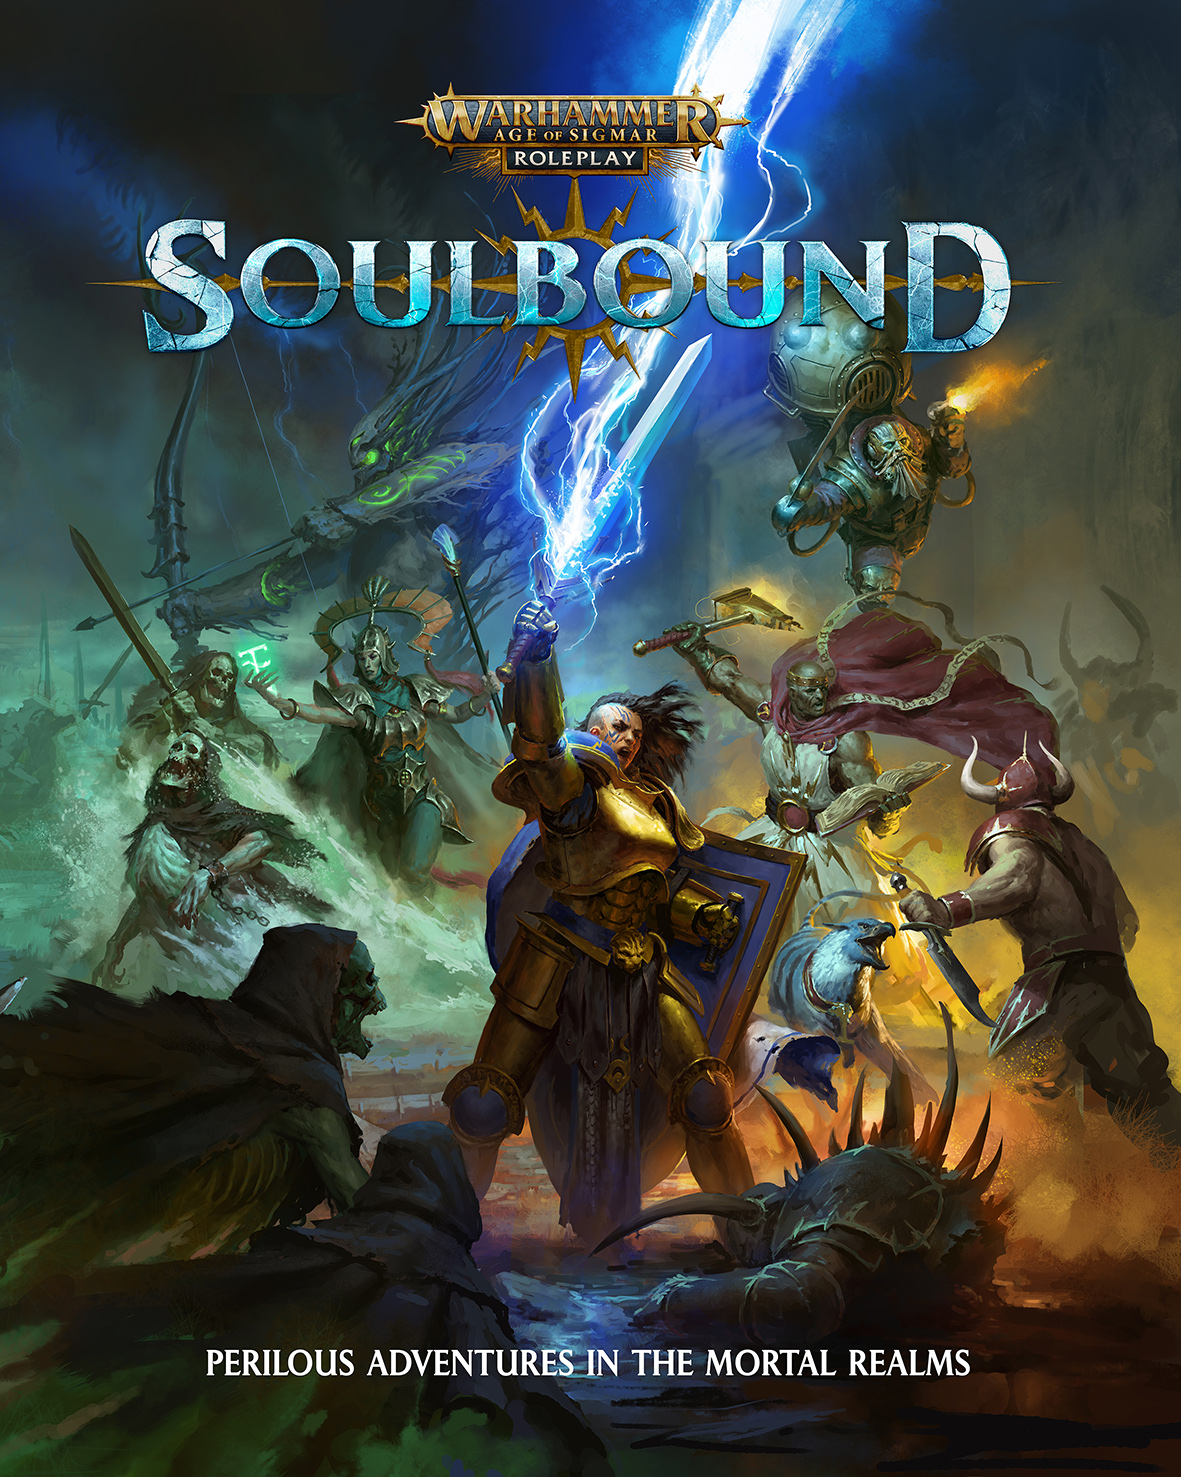 The soulbound cover page. A female warrior in armour holds a sword above her head as she calls lighting from it. Her allies: a flying dwarf pirate, a priest with a hammer, a treeman with a bow and an elven water sorcerer, help her fight off various undead and demonic enemies.